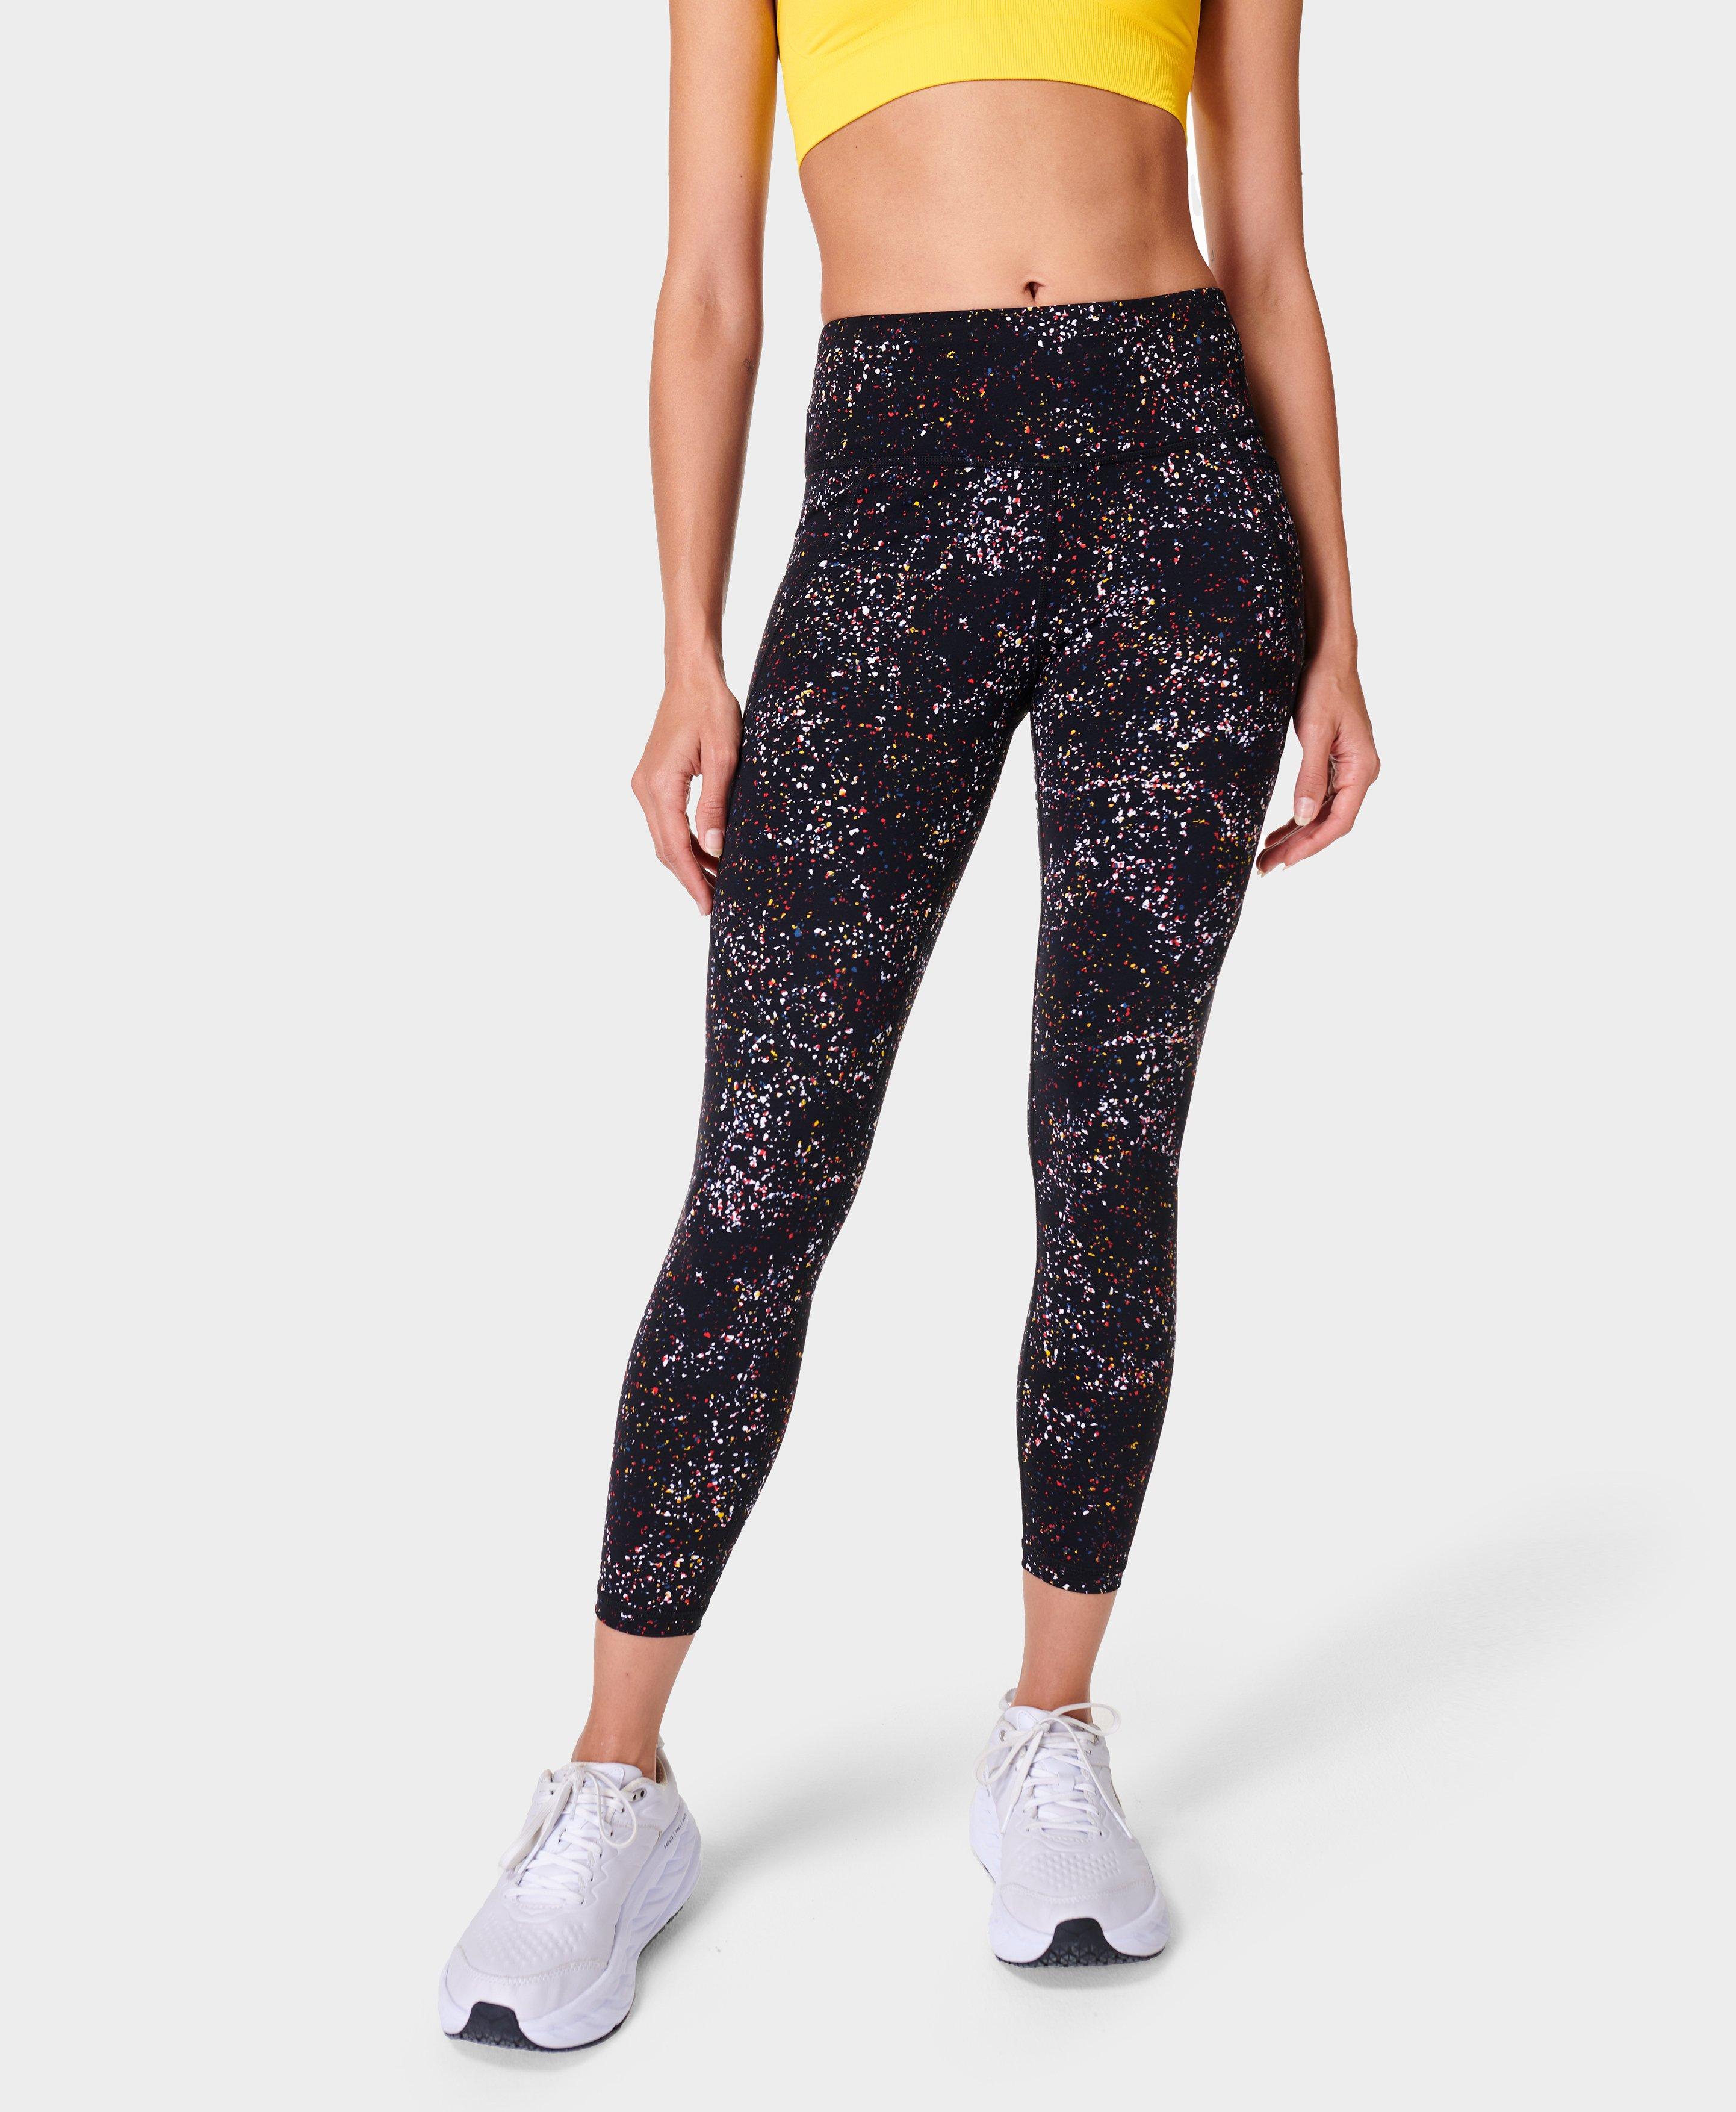 YStyle - 20% off code at Sweaty Betty for two weeks SBYVONNE20 -   Full try ons of new arrivals over on  www.instagram.com/ystyleireland Super Sculpt Leggings -   Power Leggings 